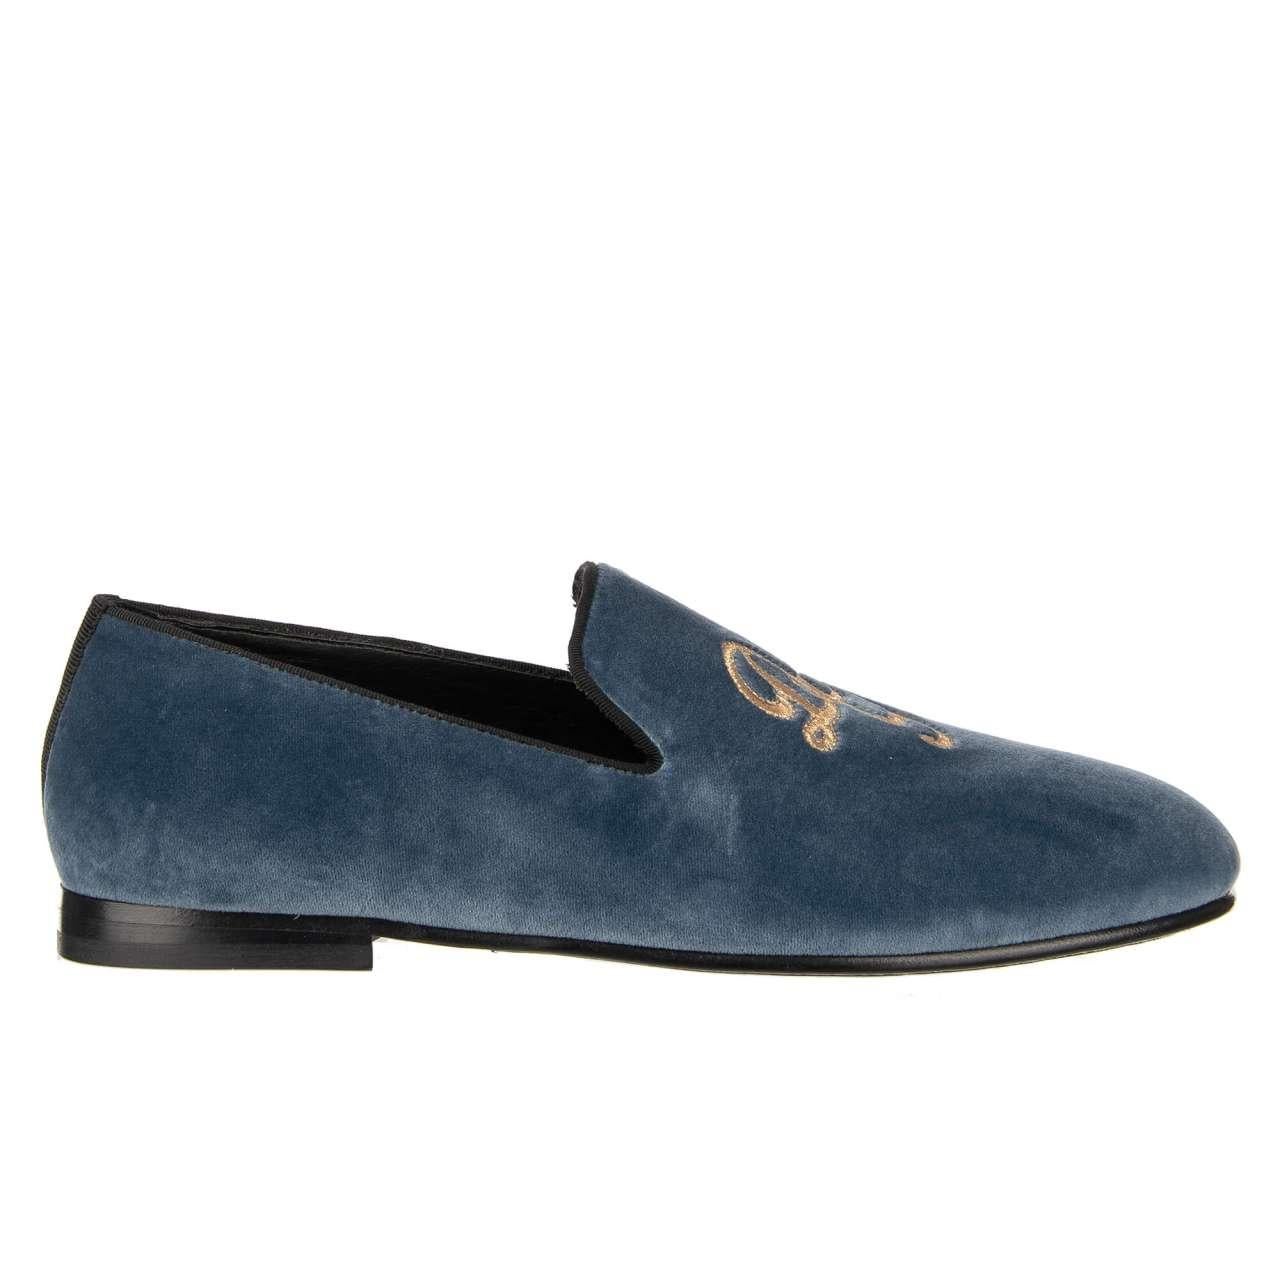 - Velvet loafer shoes AMALFI with embroidered golden DG logo in light blue by DOLCE & GABBANA - MADE IN ITALY - Former RRP: EUR 595 - New with Box - Model: A50335-B9L43-80620 - Material: 89% Cotton, 10% Viscose, 1% Elastan - Sole: Leather - Color: